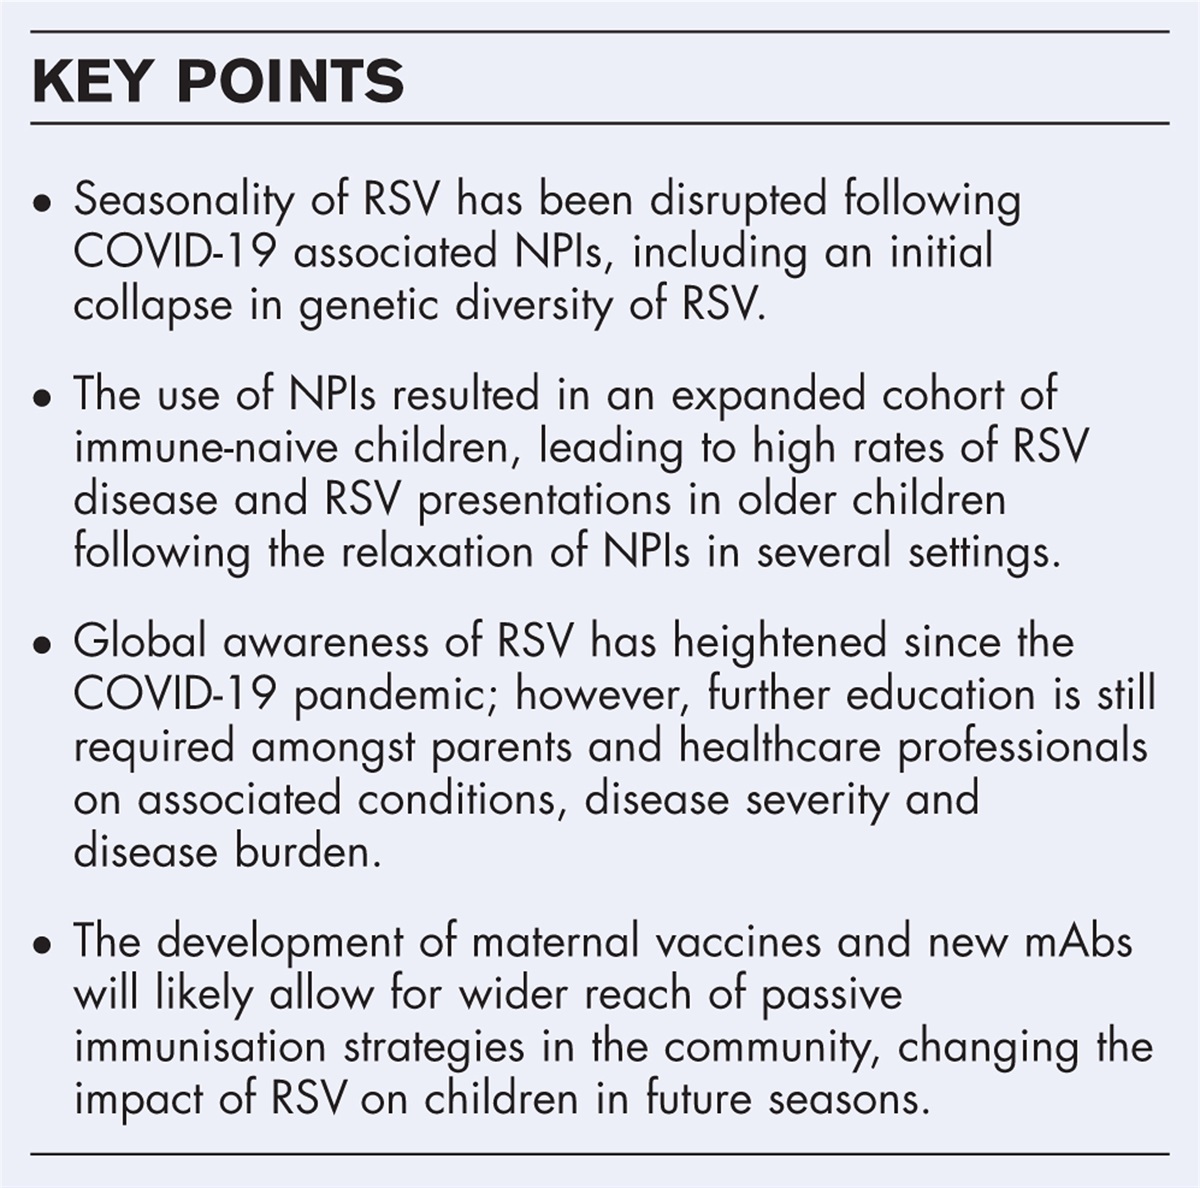 Respiratory syncytial virus in children: epidemiology and clinical impact post-COVID-19